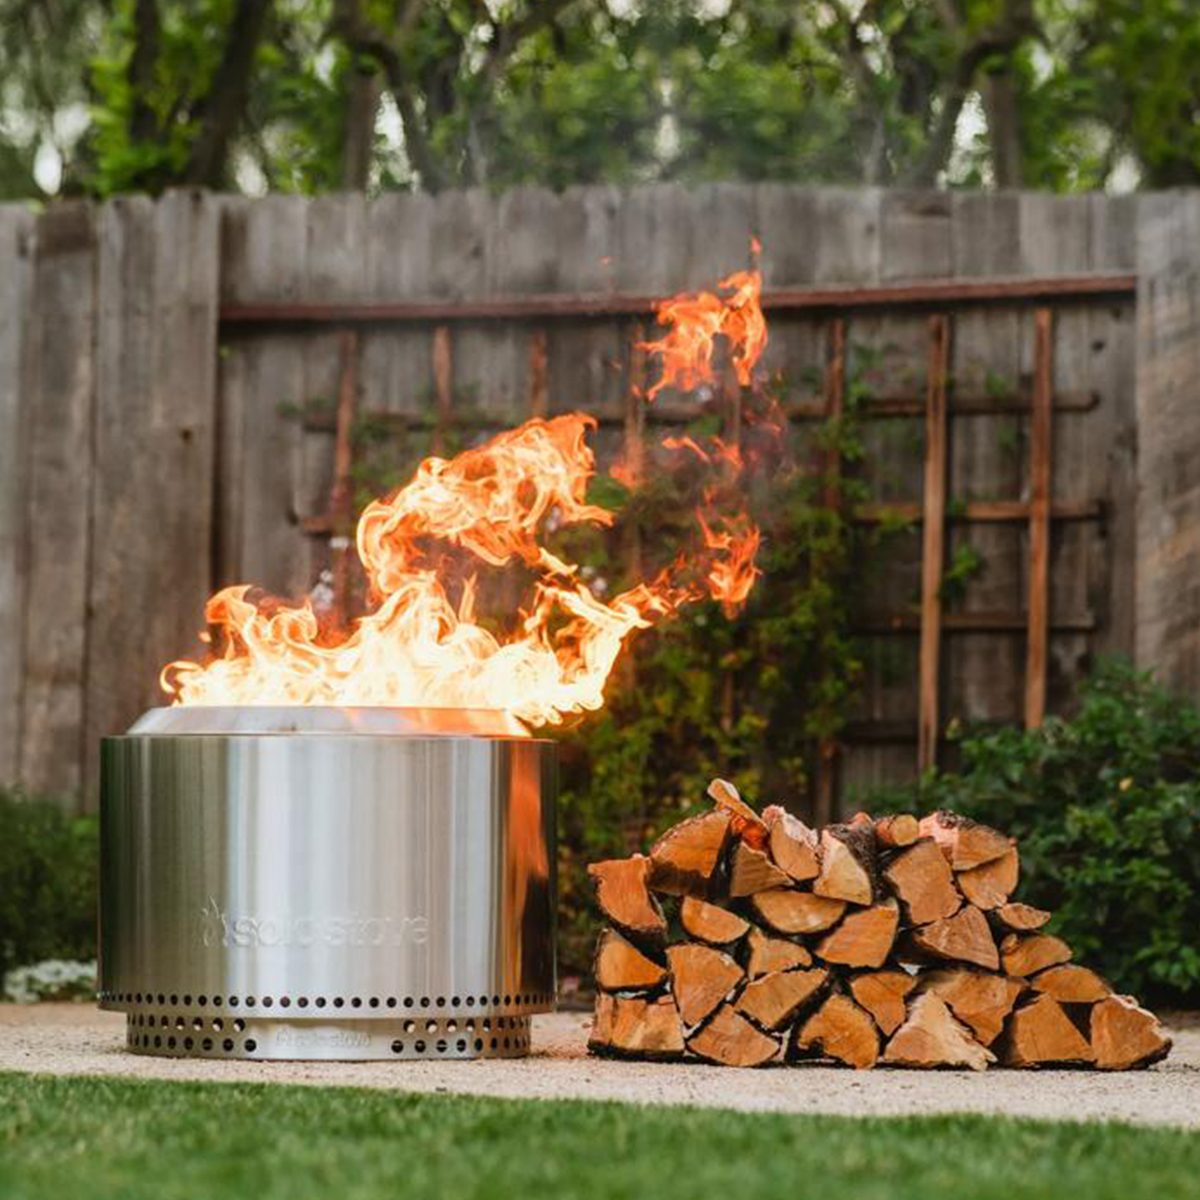 The Best Fire Pit Sales Include Solo Stove, East Oak and More